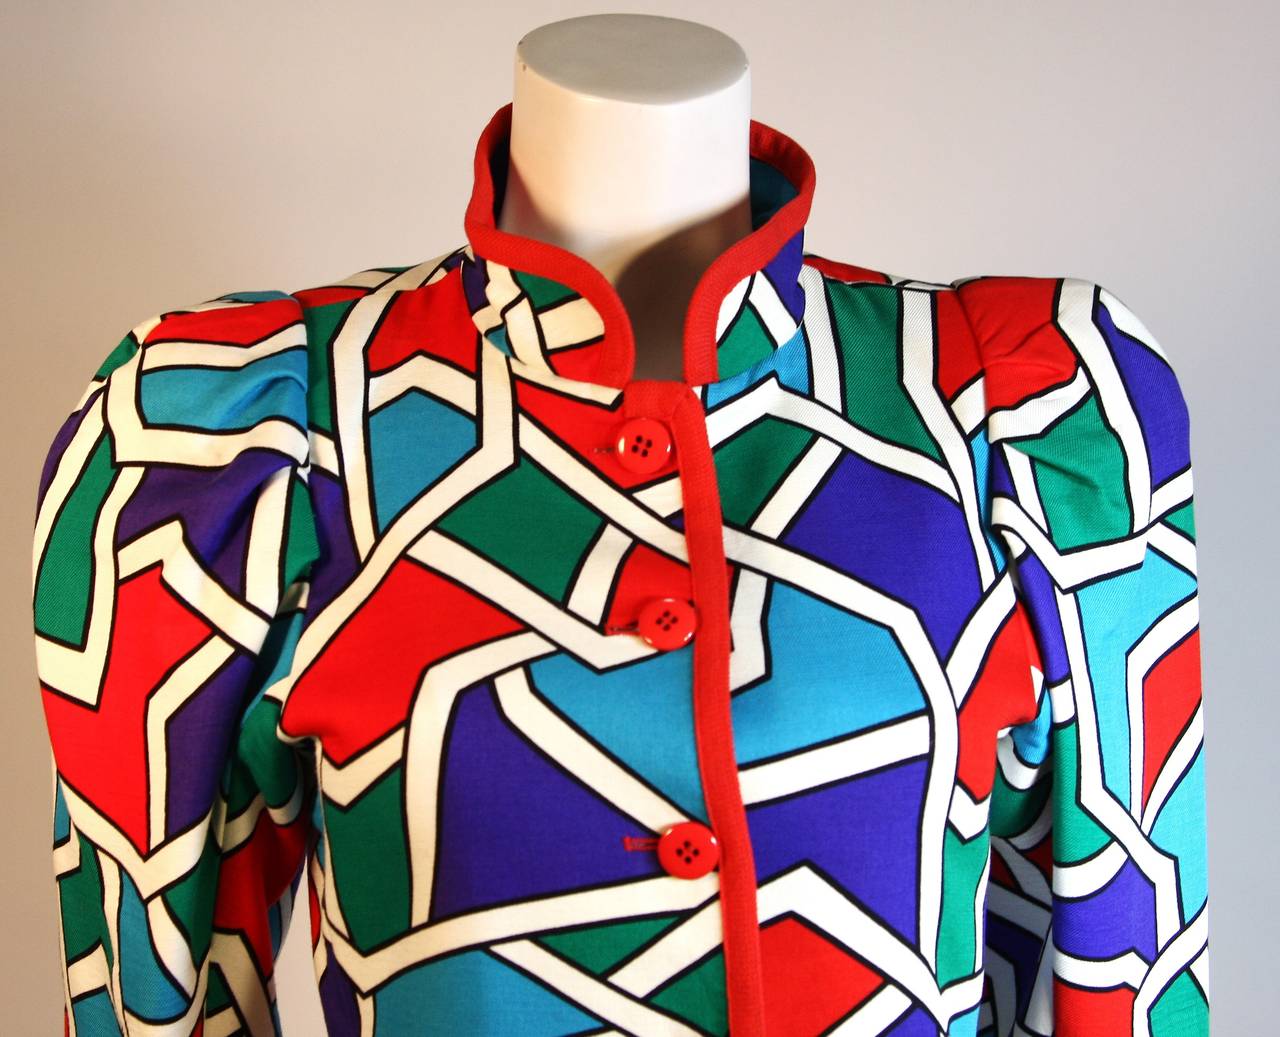 This is a Yves Saint Laurent design. This jacket features a wonderful color block print with mandarin collar and puff sleeve design. There are center front buttons for closure. The jacket is trimmed in red. Made in France. 

Measures